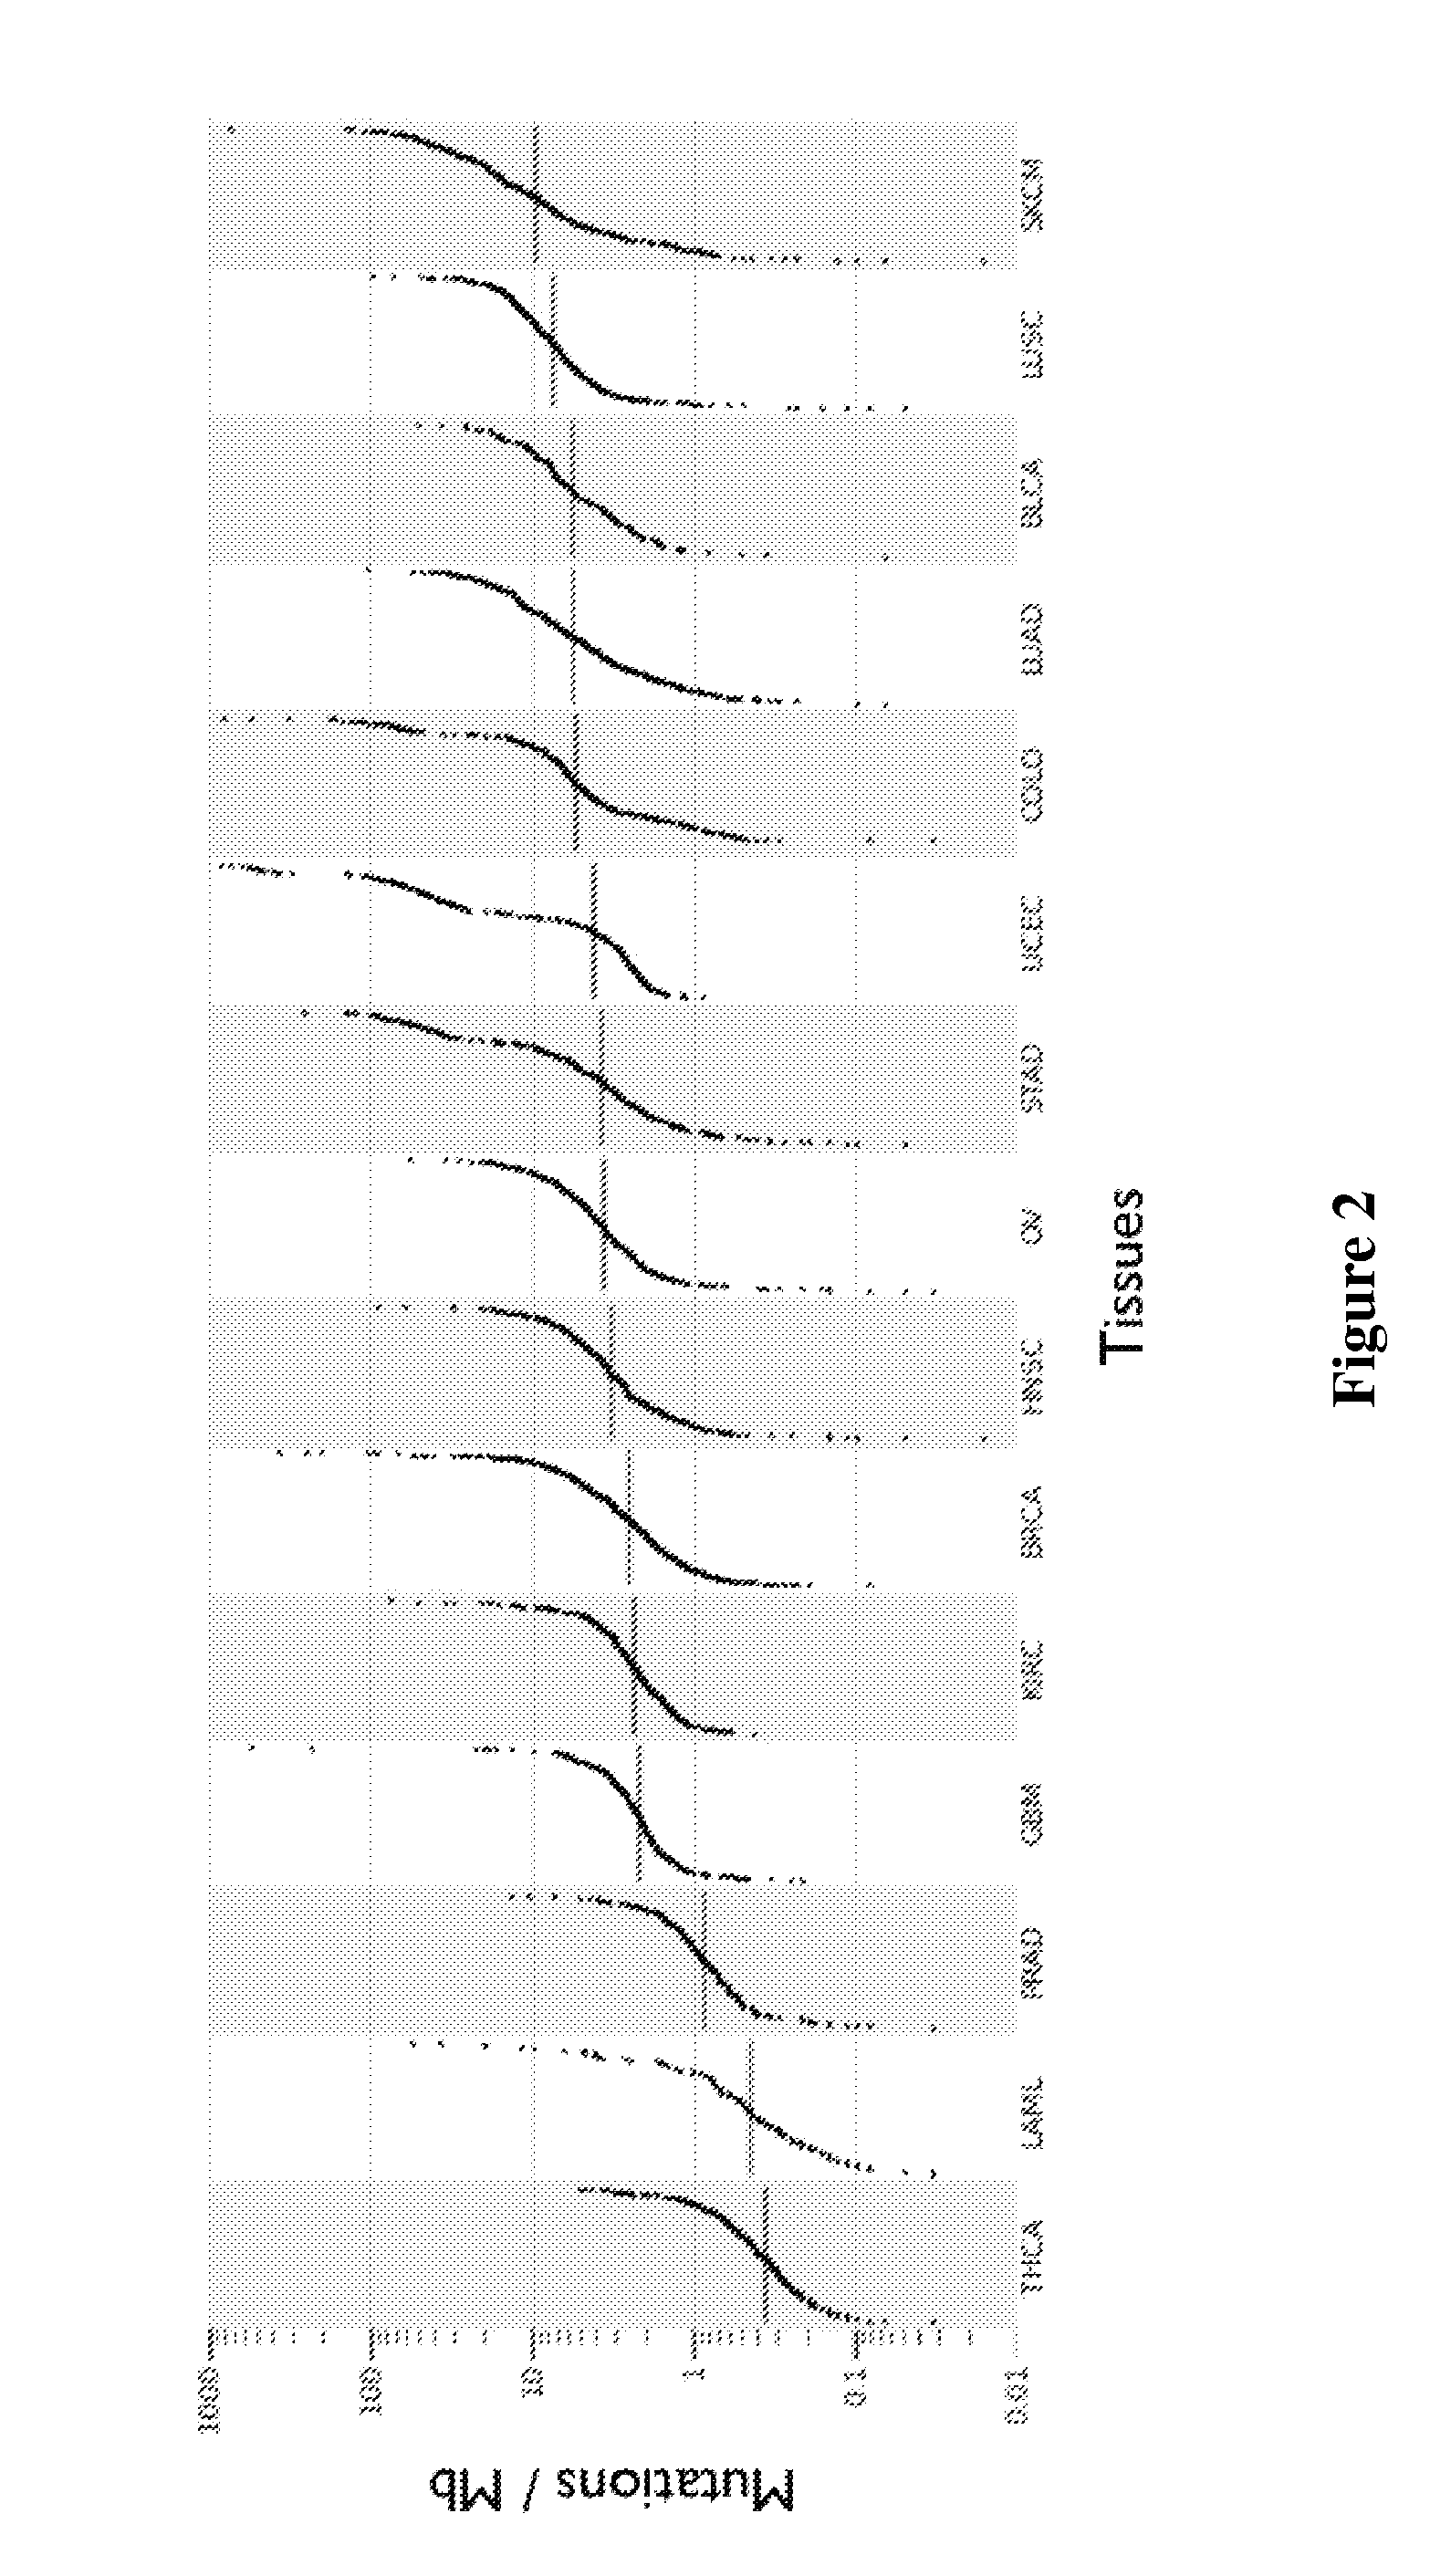 Systems and Methods For RNA Analysis In Functional Confirmation Of Cancer Mutations